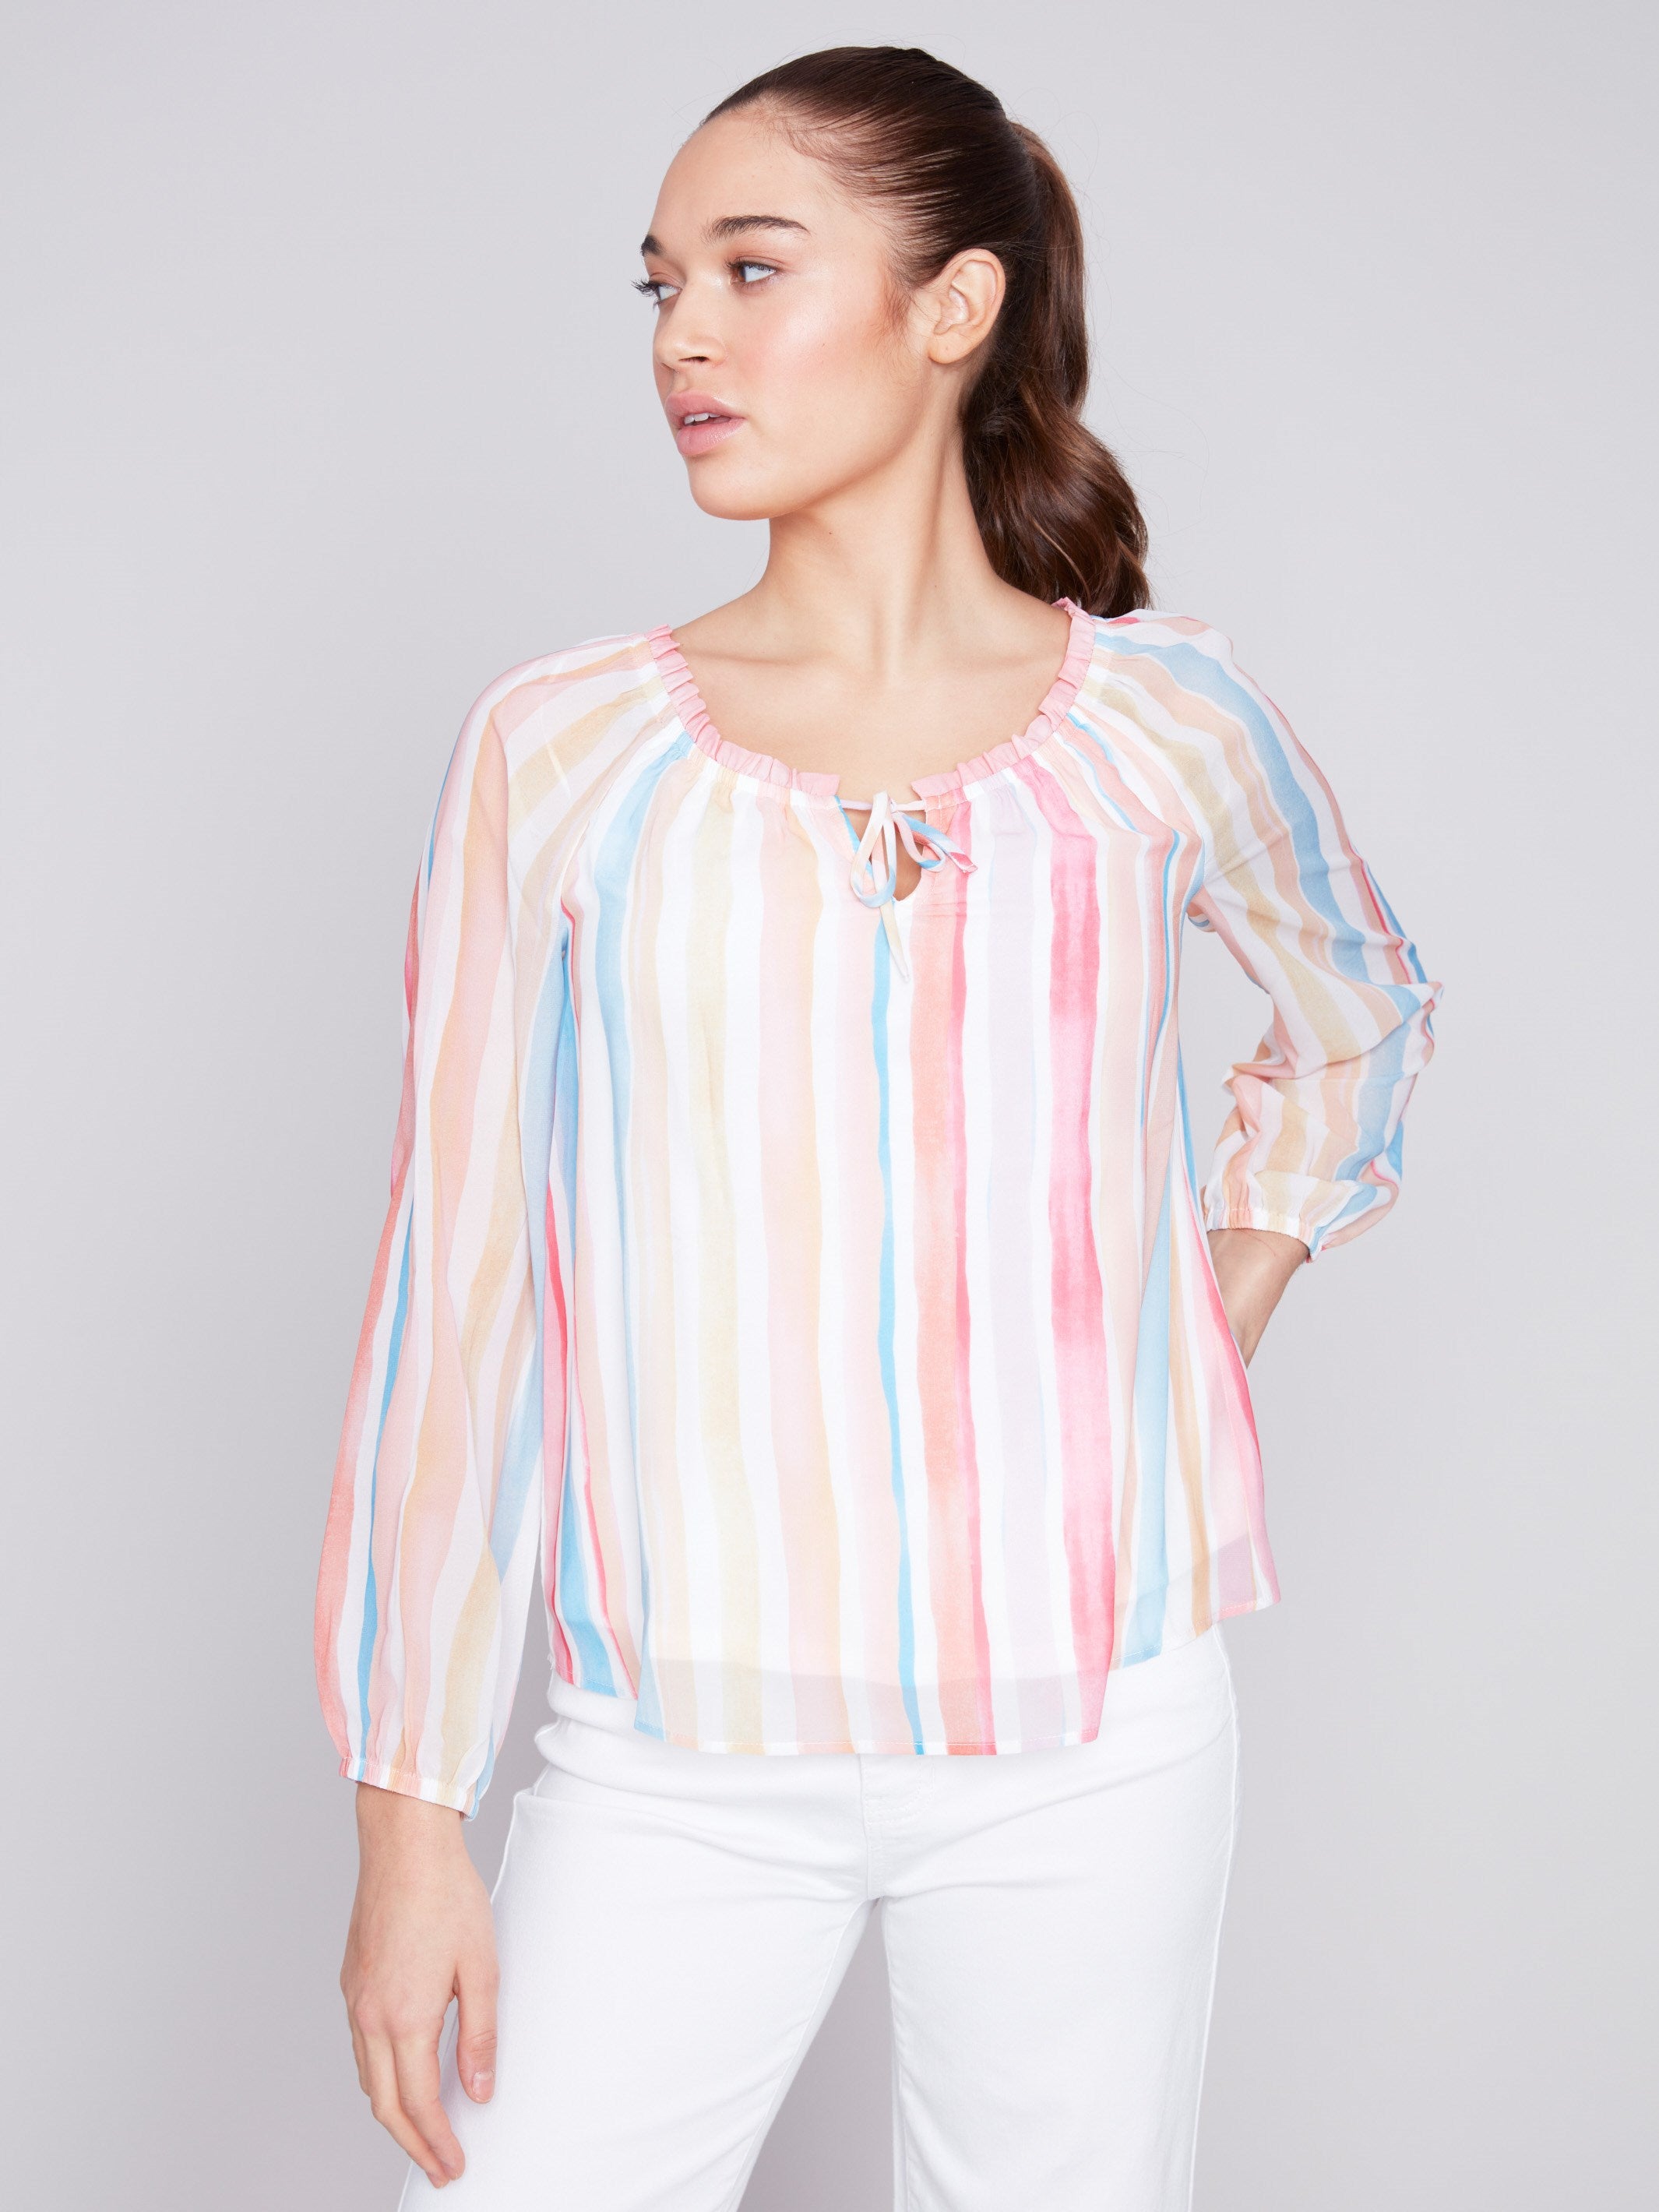 Printed Chiffon Blouse - Stripes - Charlie B Collection Canada - Image 2